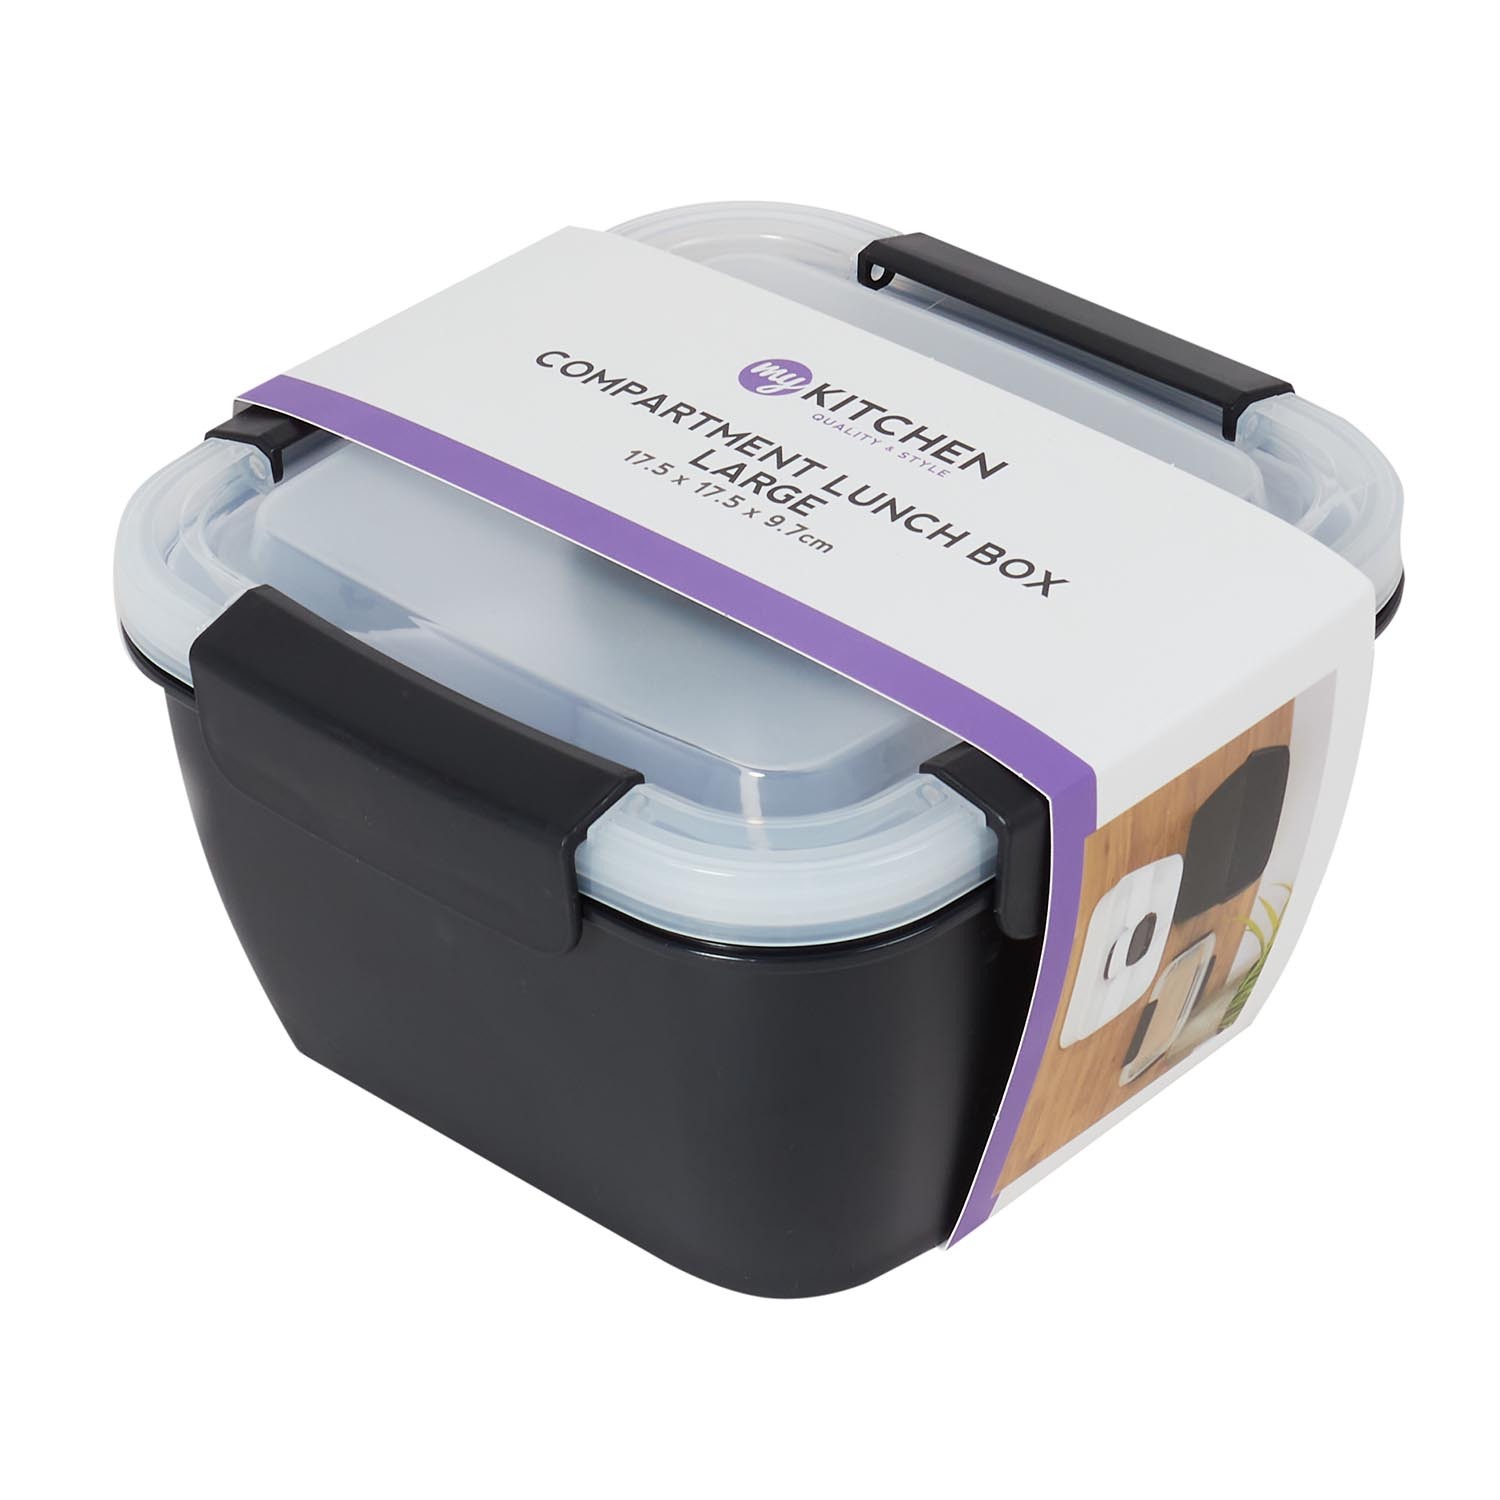 Square Compartment Lunch Box - Black / Large Image 2